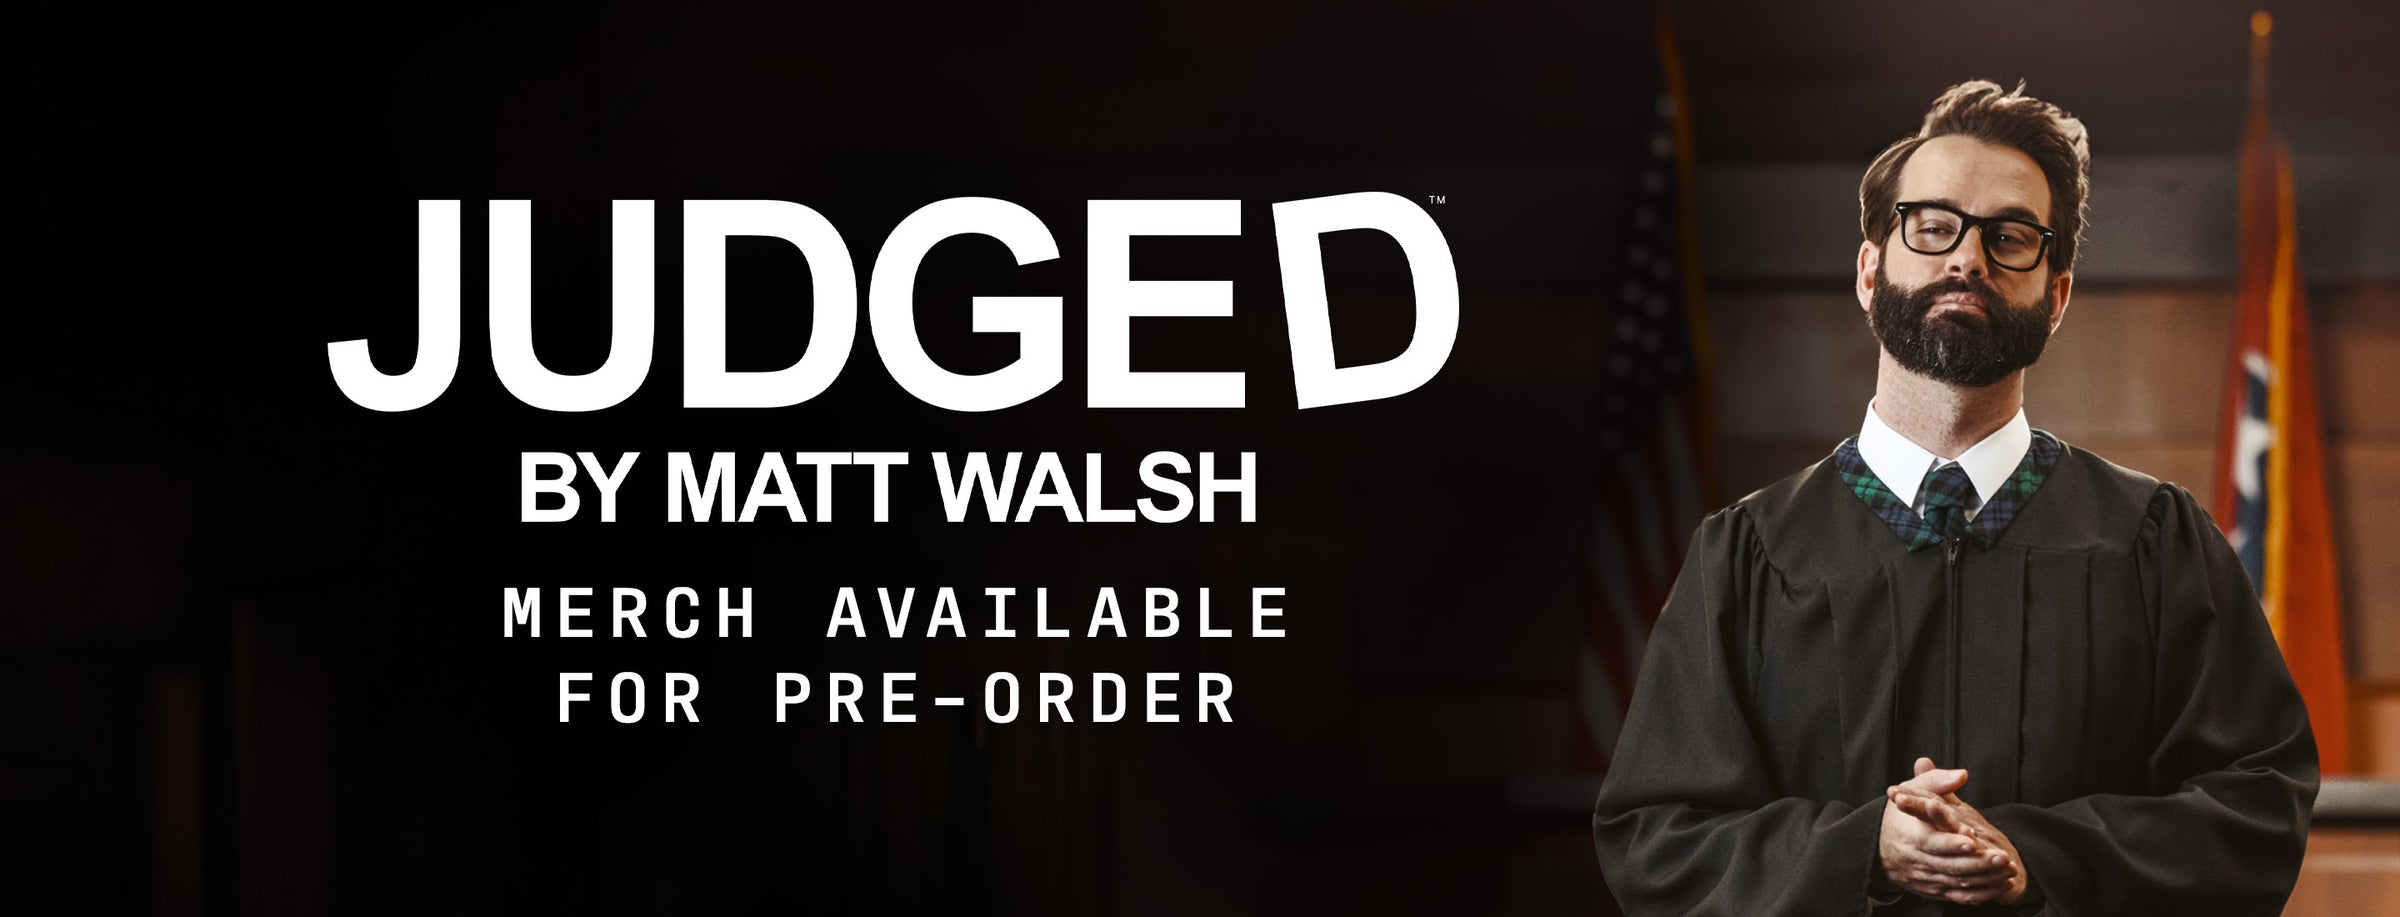 Judged by Matt Walsh Merch Available for Pre-Order